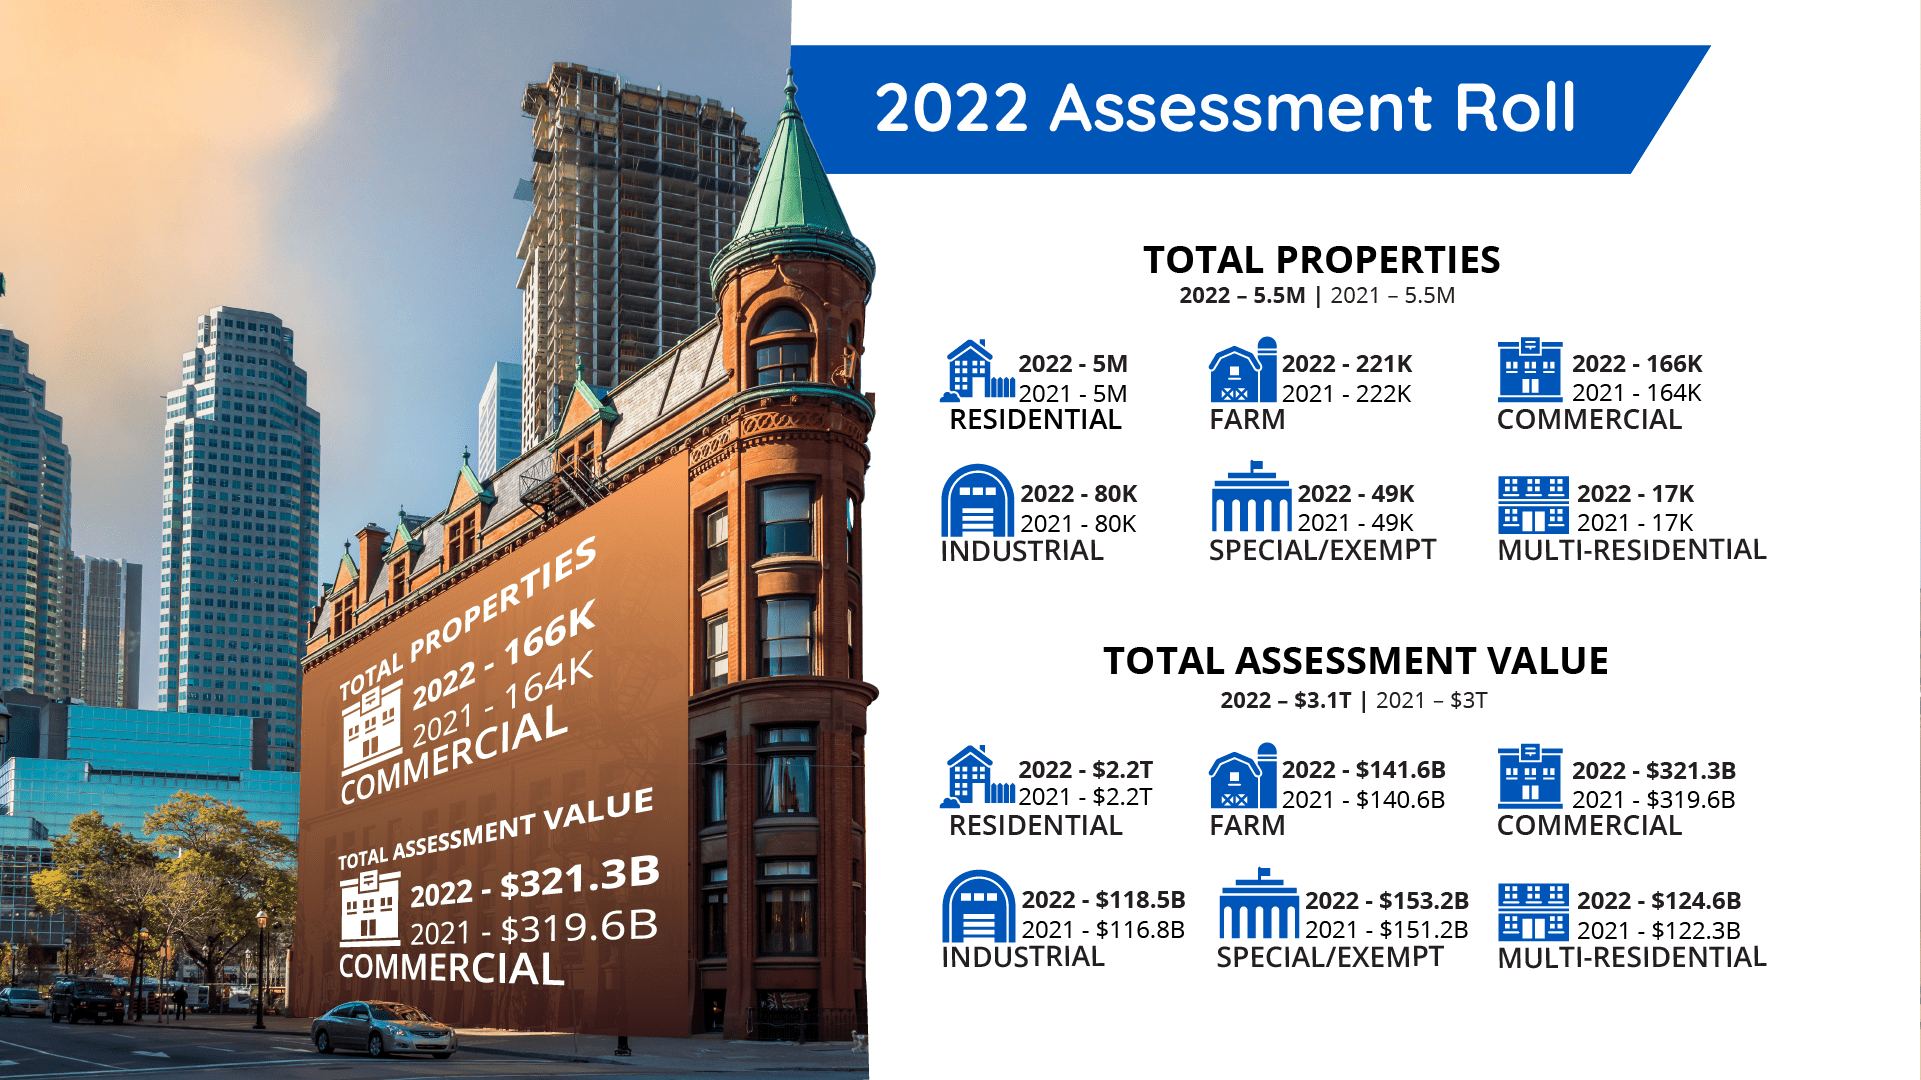 Visual of total assessment roll for 2022 including the total number of properties and assessment value.